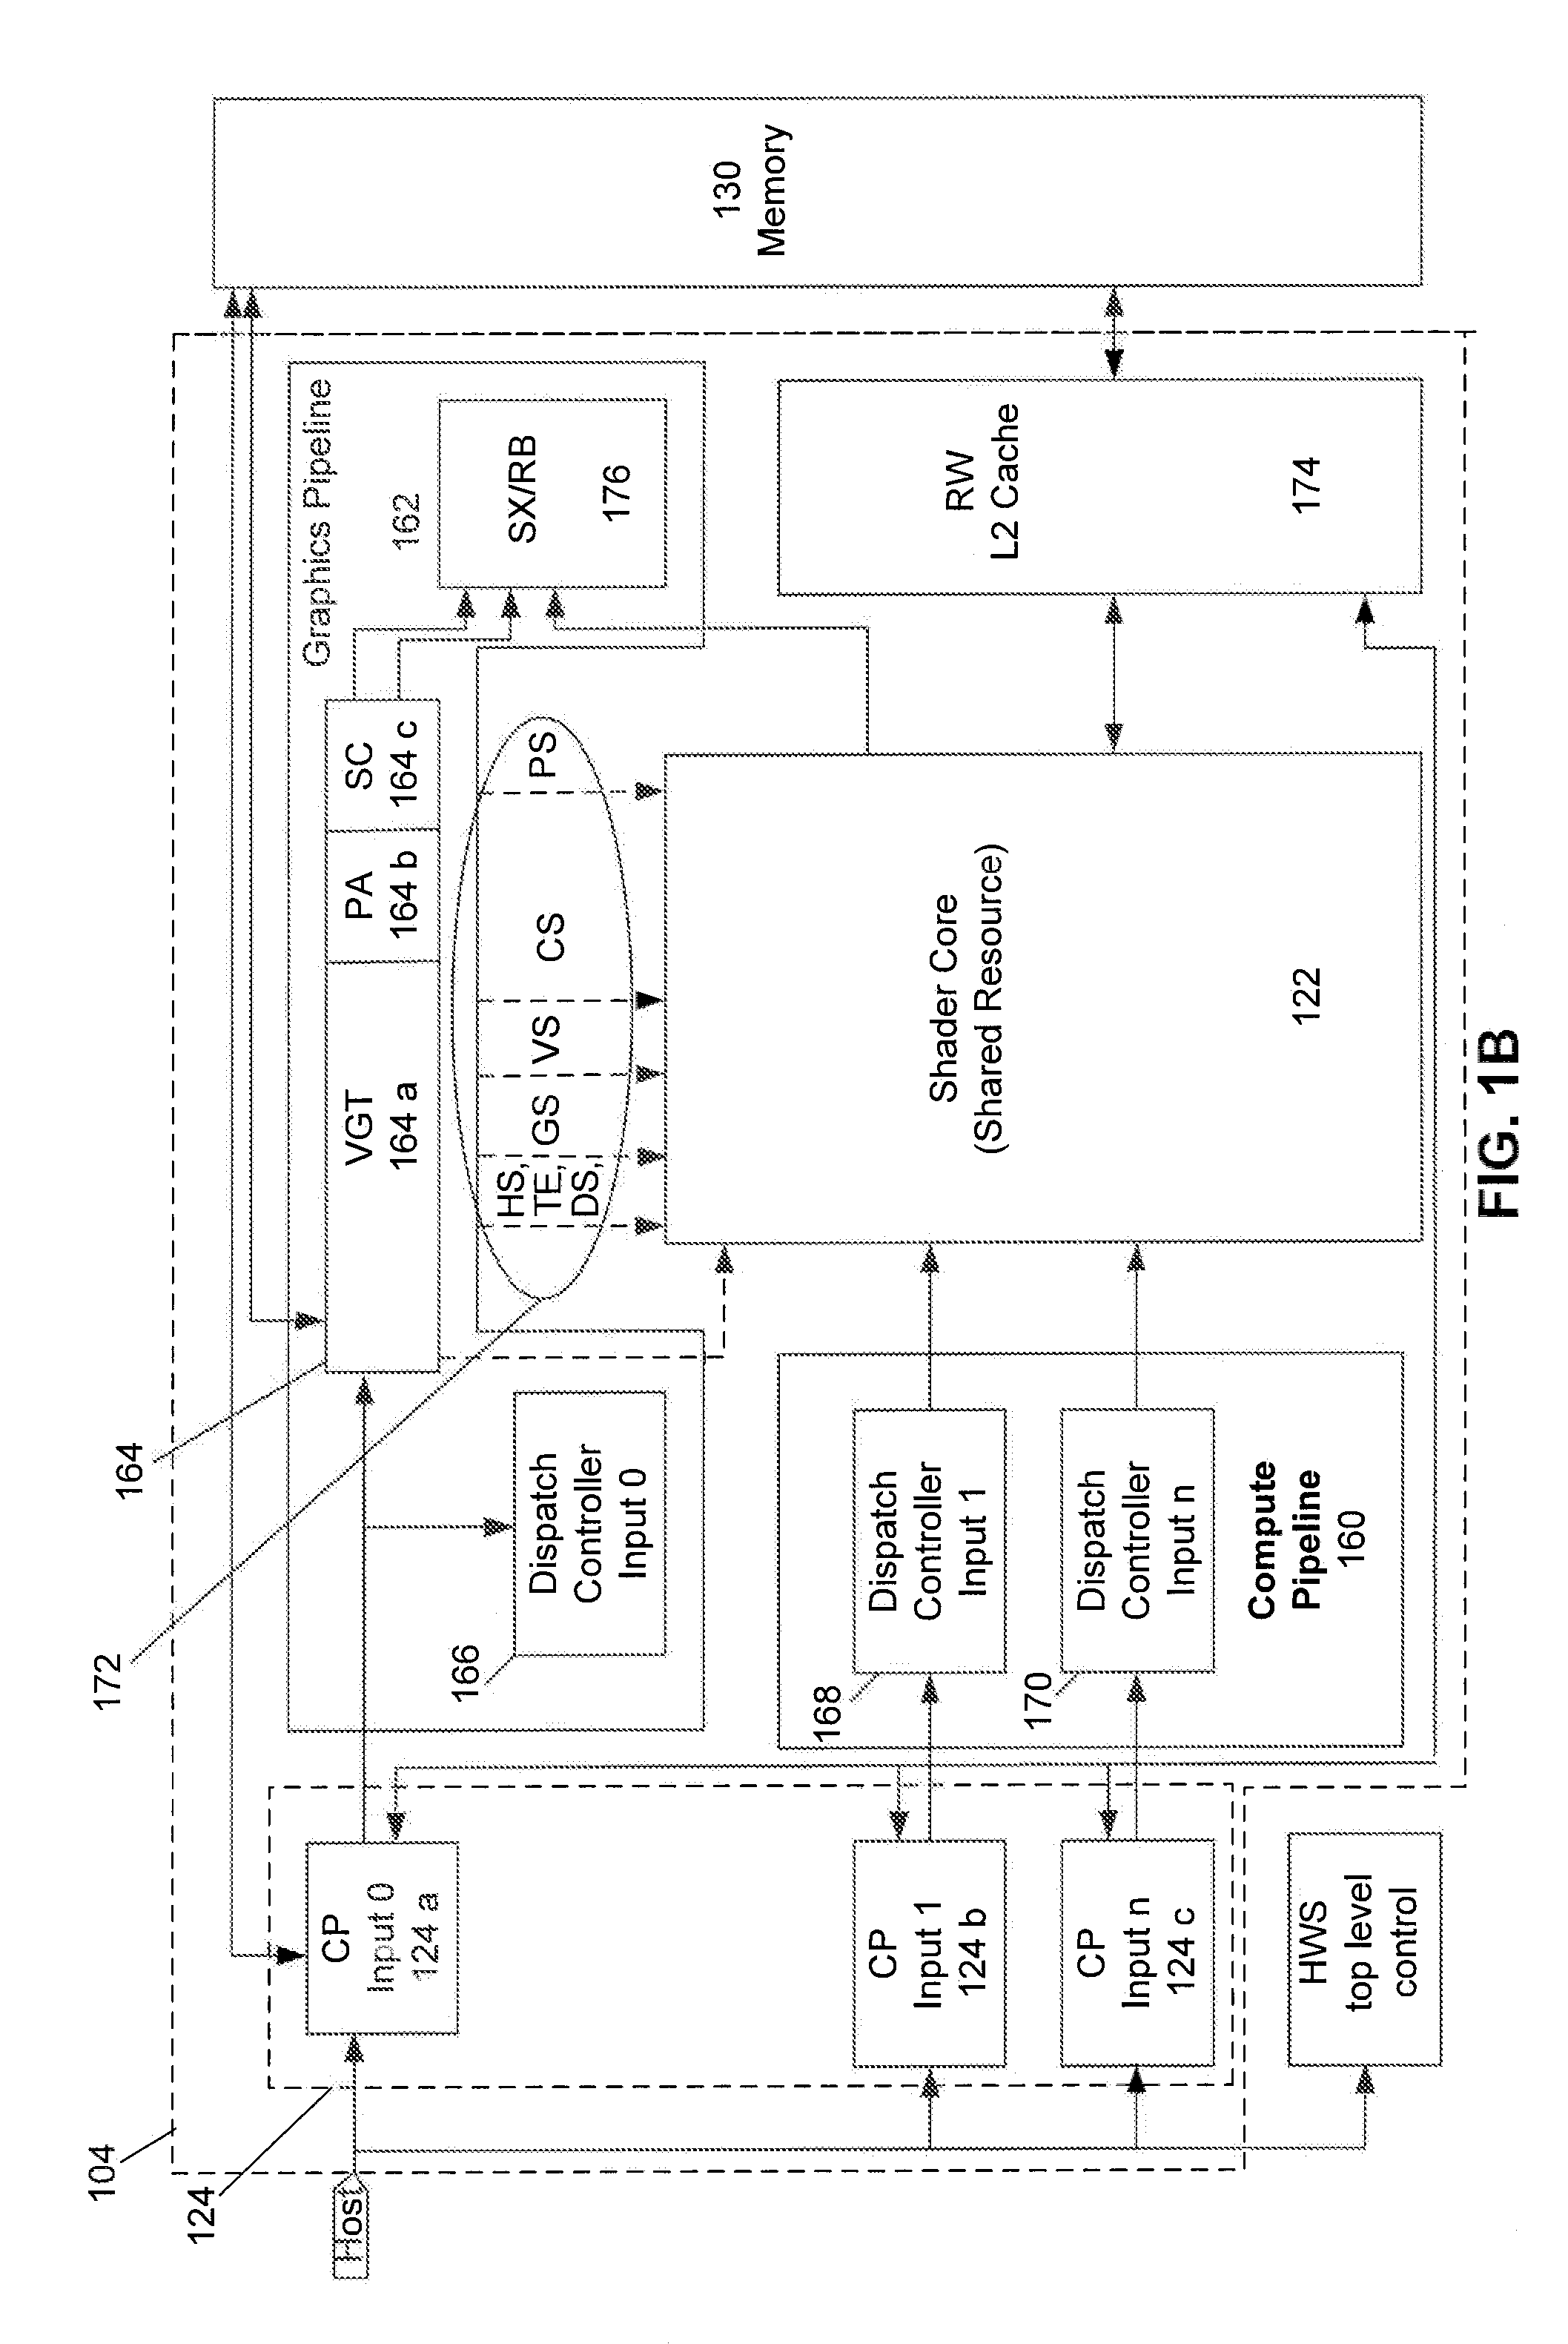 Partitioning Resources of a Processor